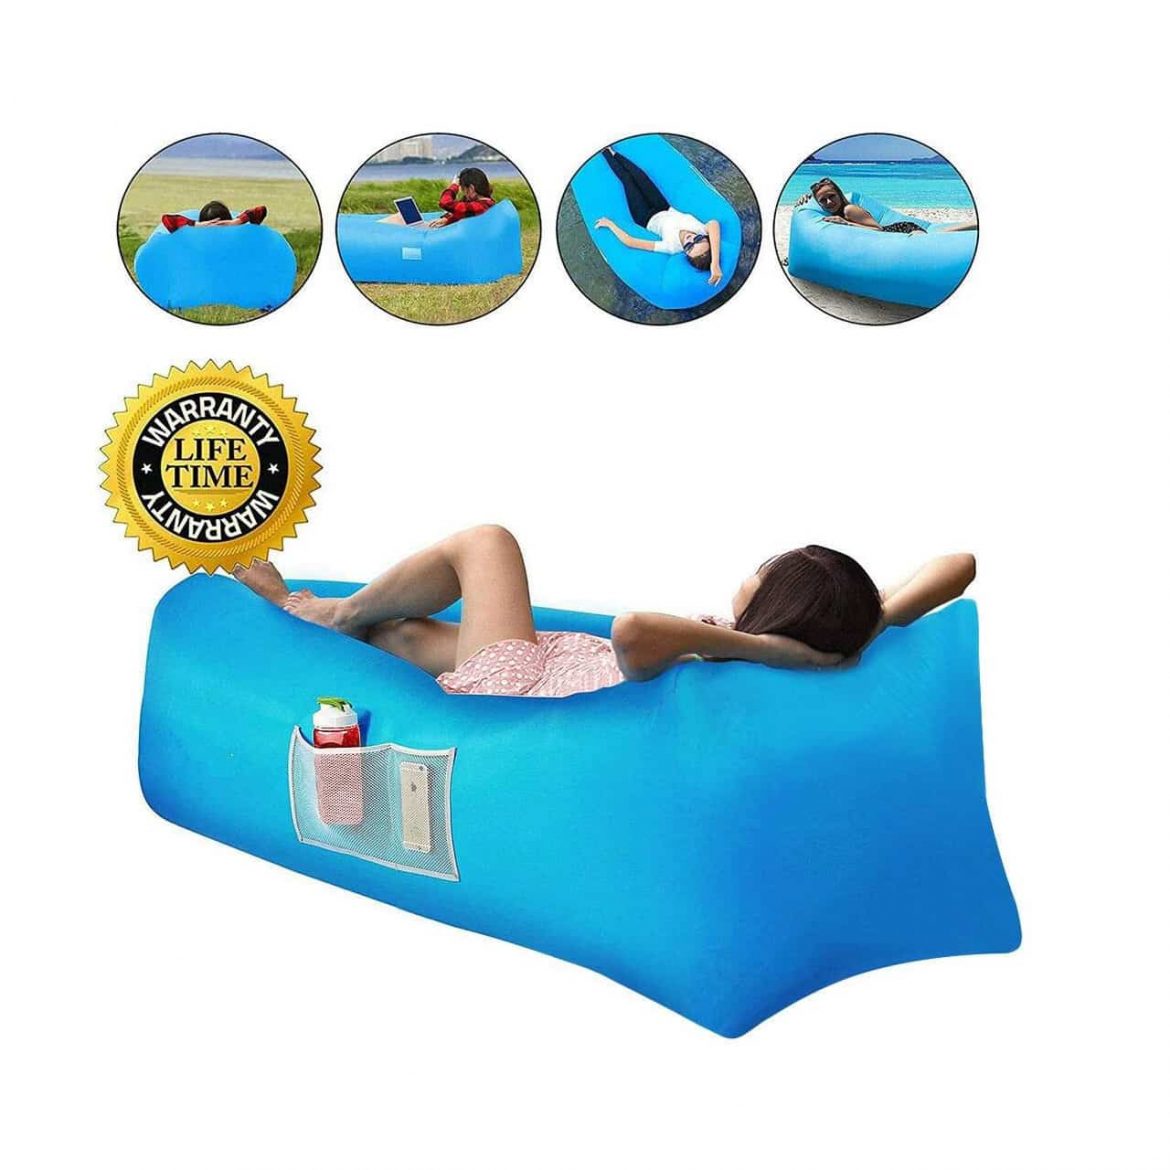 Top 10 Best Inflatable Loungers in 2021 Reviews | Buyer's Guide